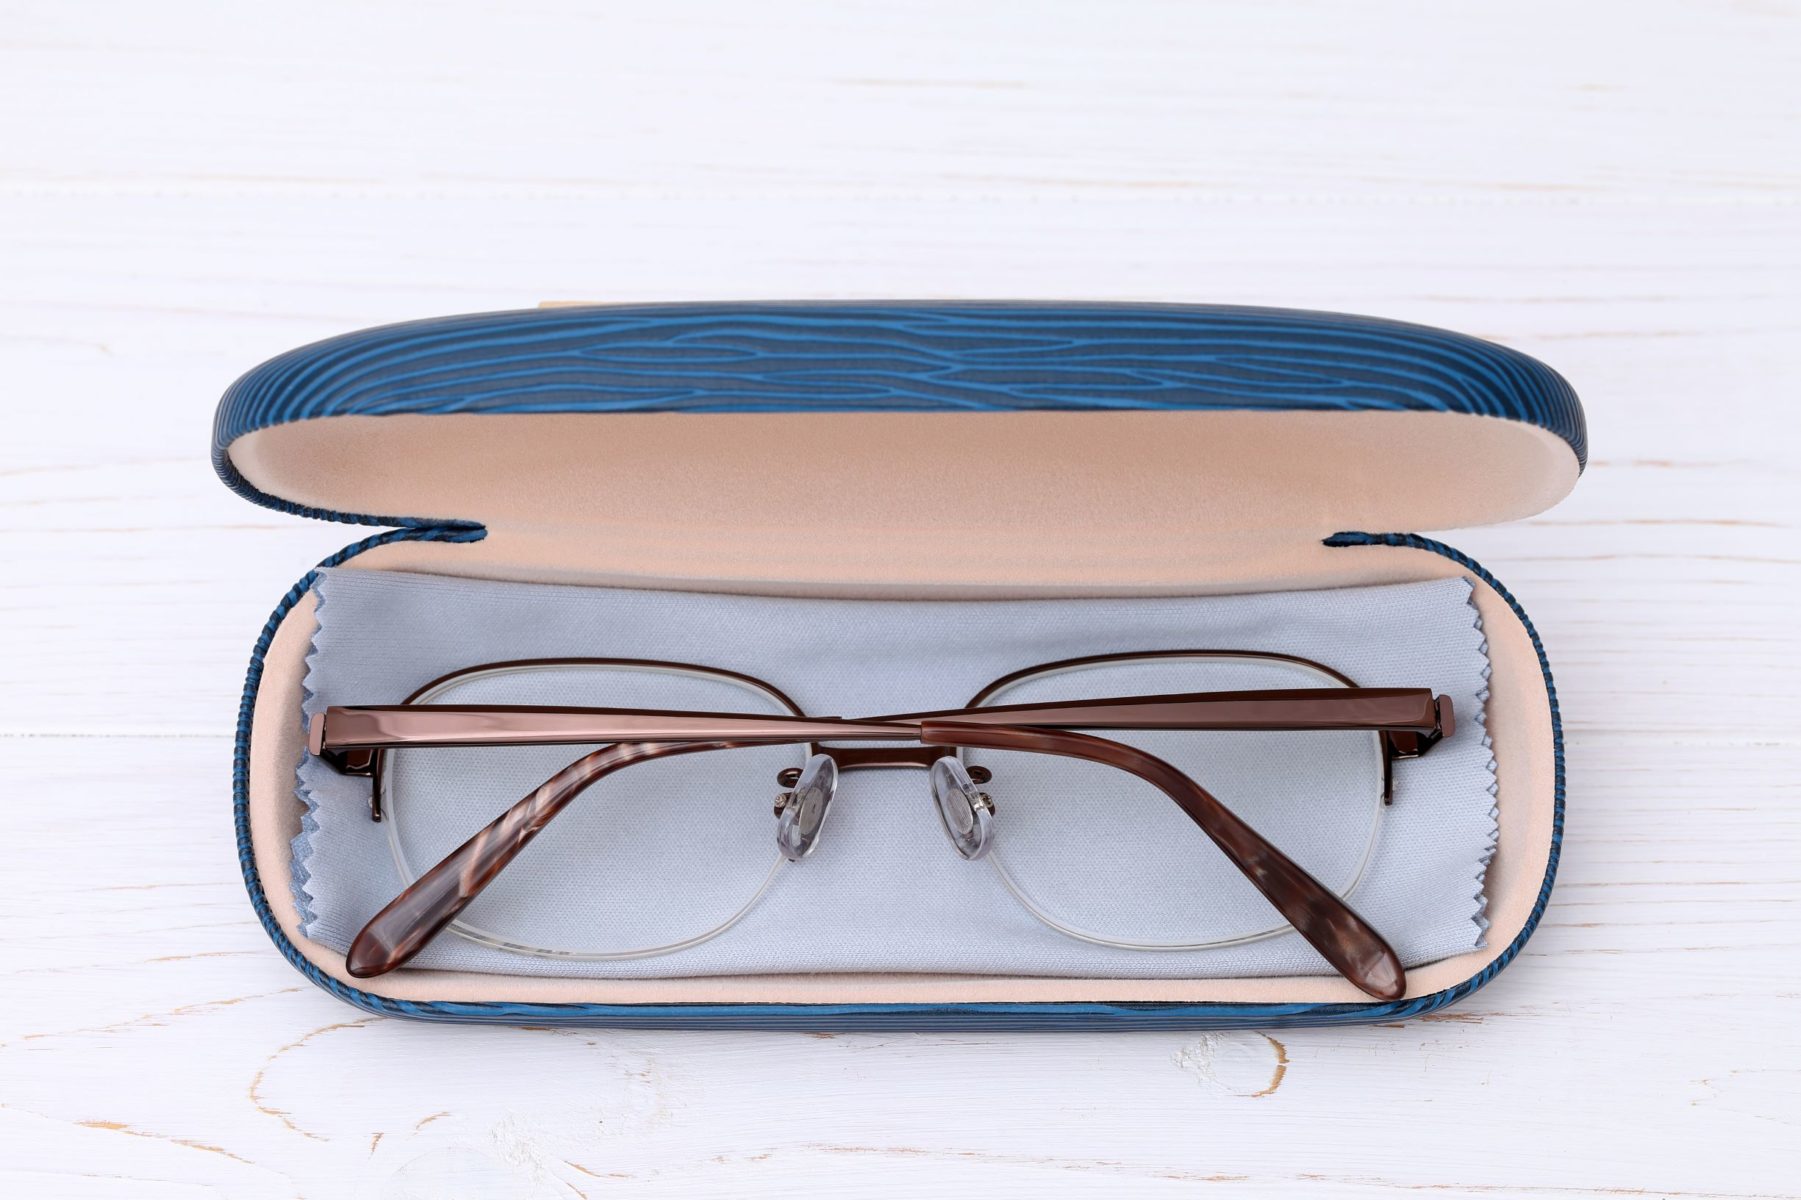 packing eyeglasses in a case for travel